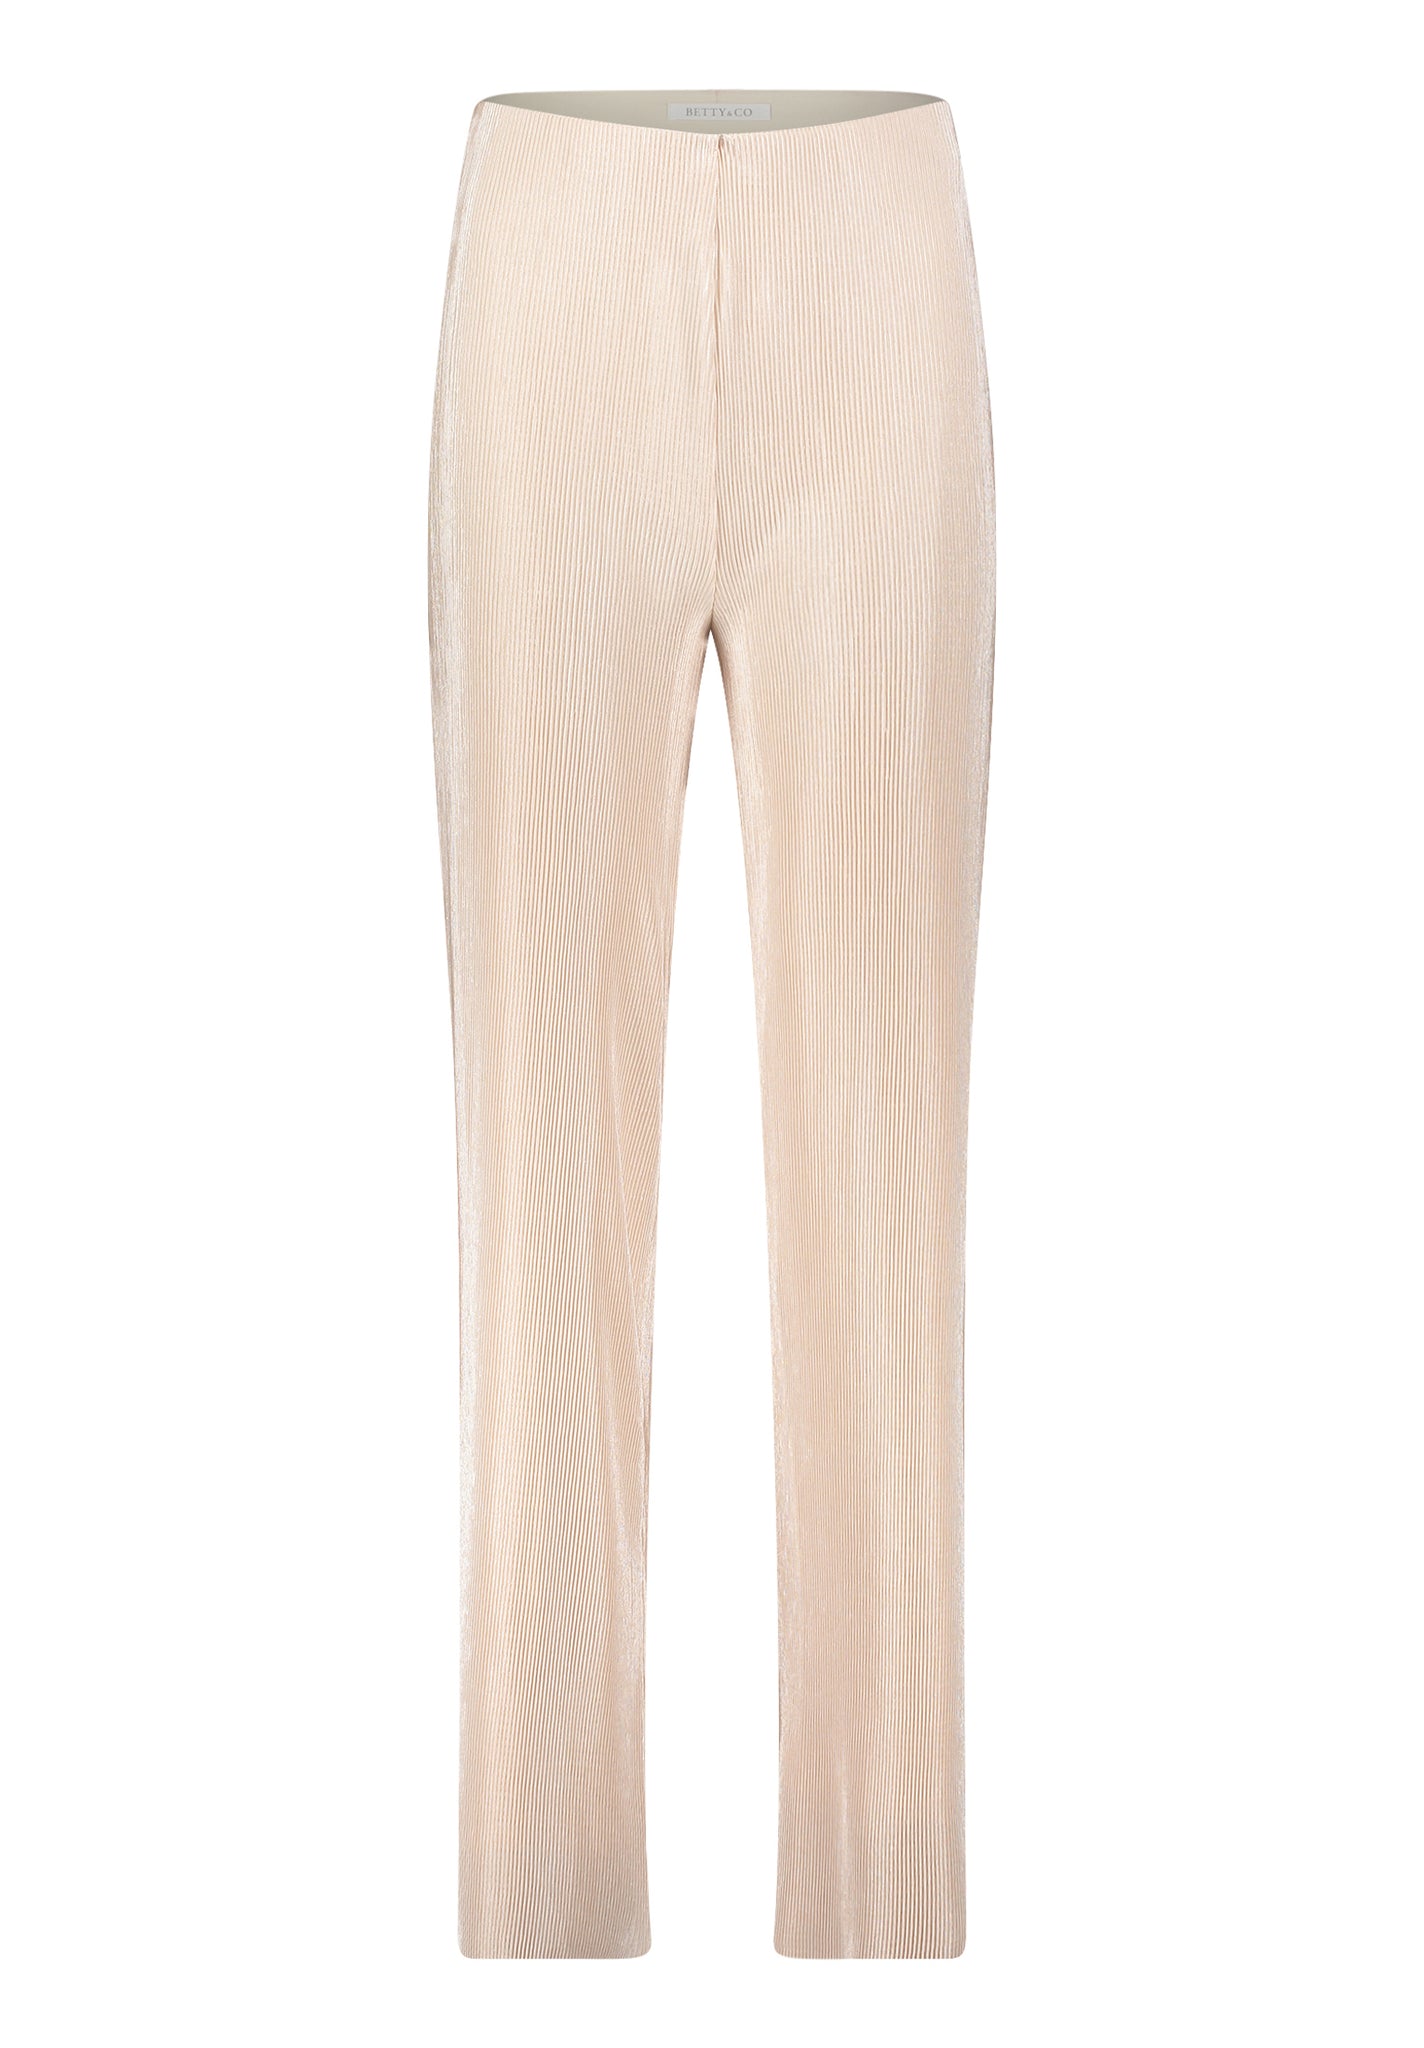 Betty&Co plisse style wide leg trousers in glittery champagne product code 6466/3361